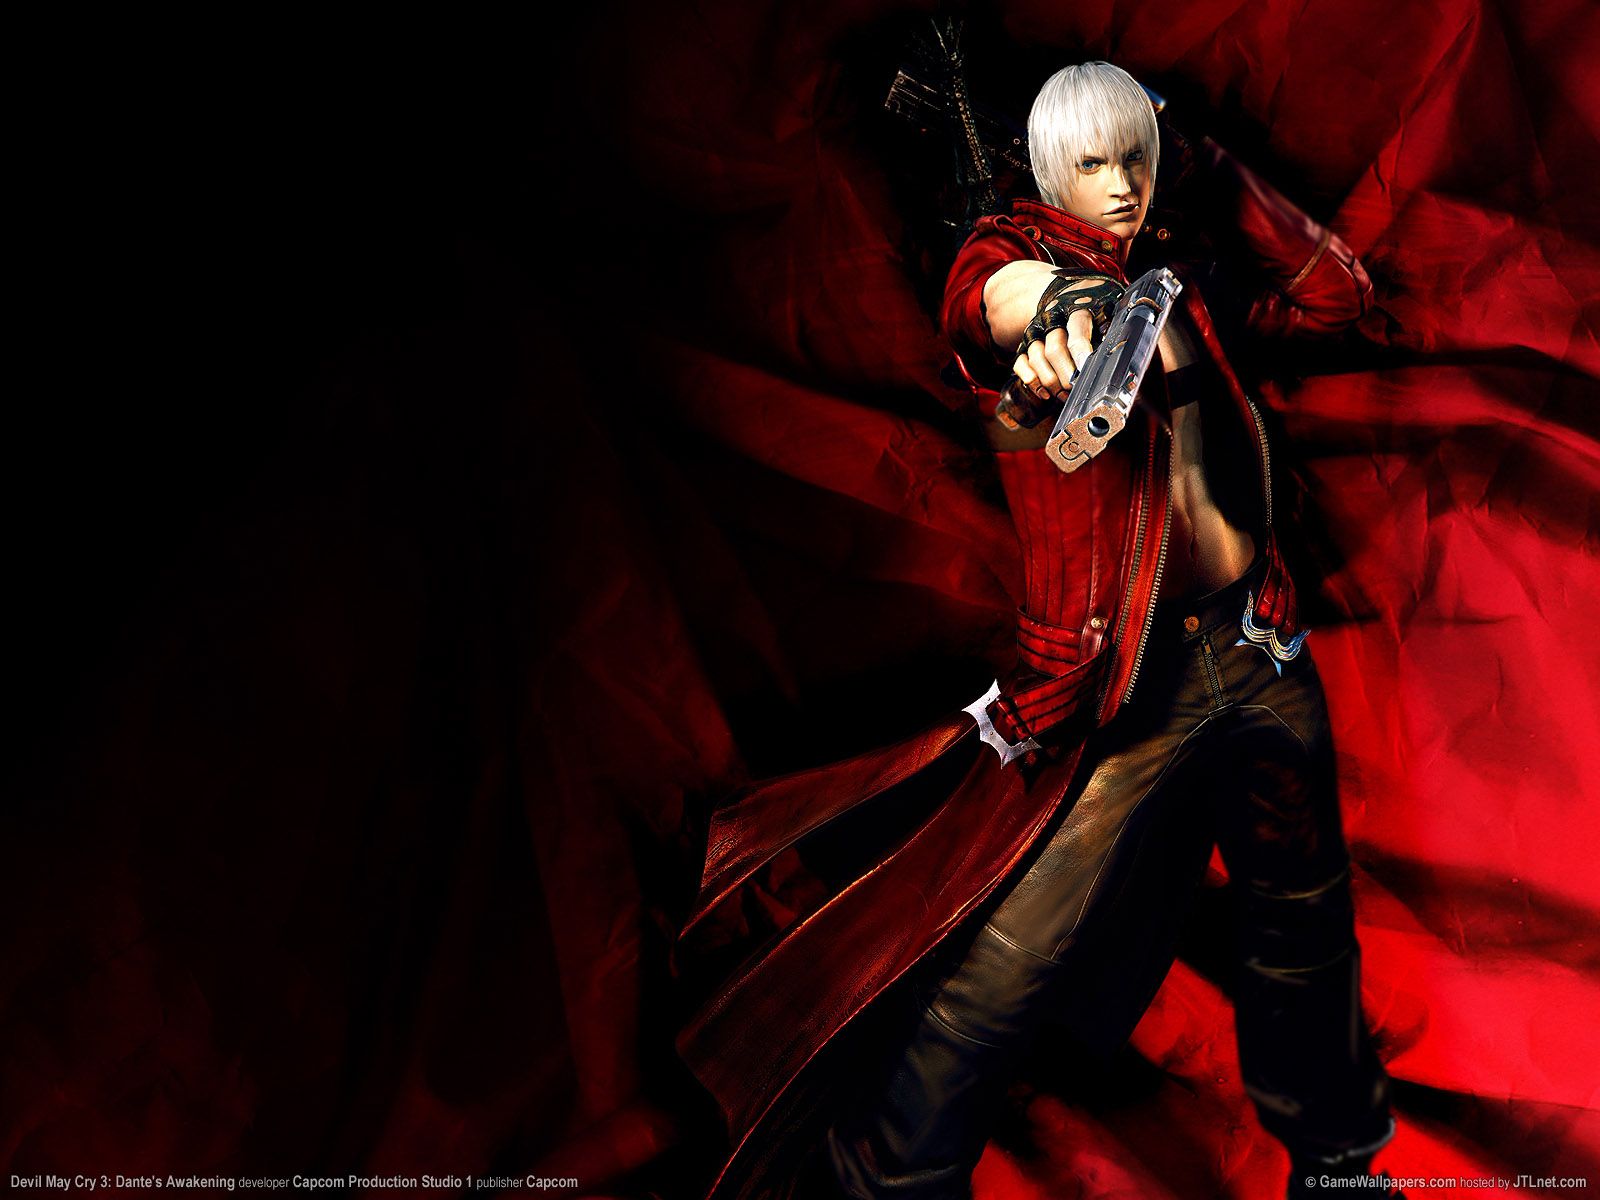 Devil May Cry 3 wallpapers | Devil May Cry 3 stock photos